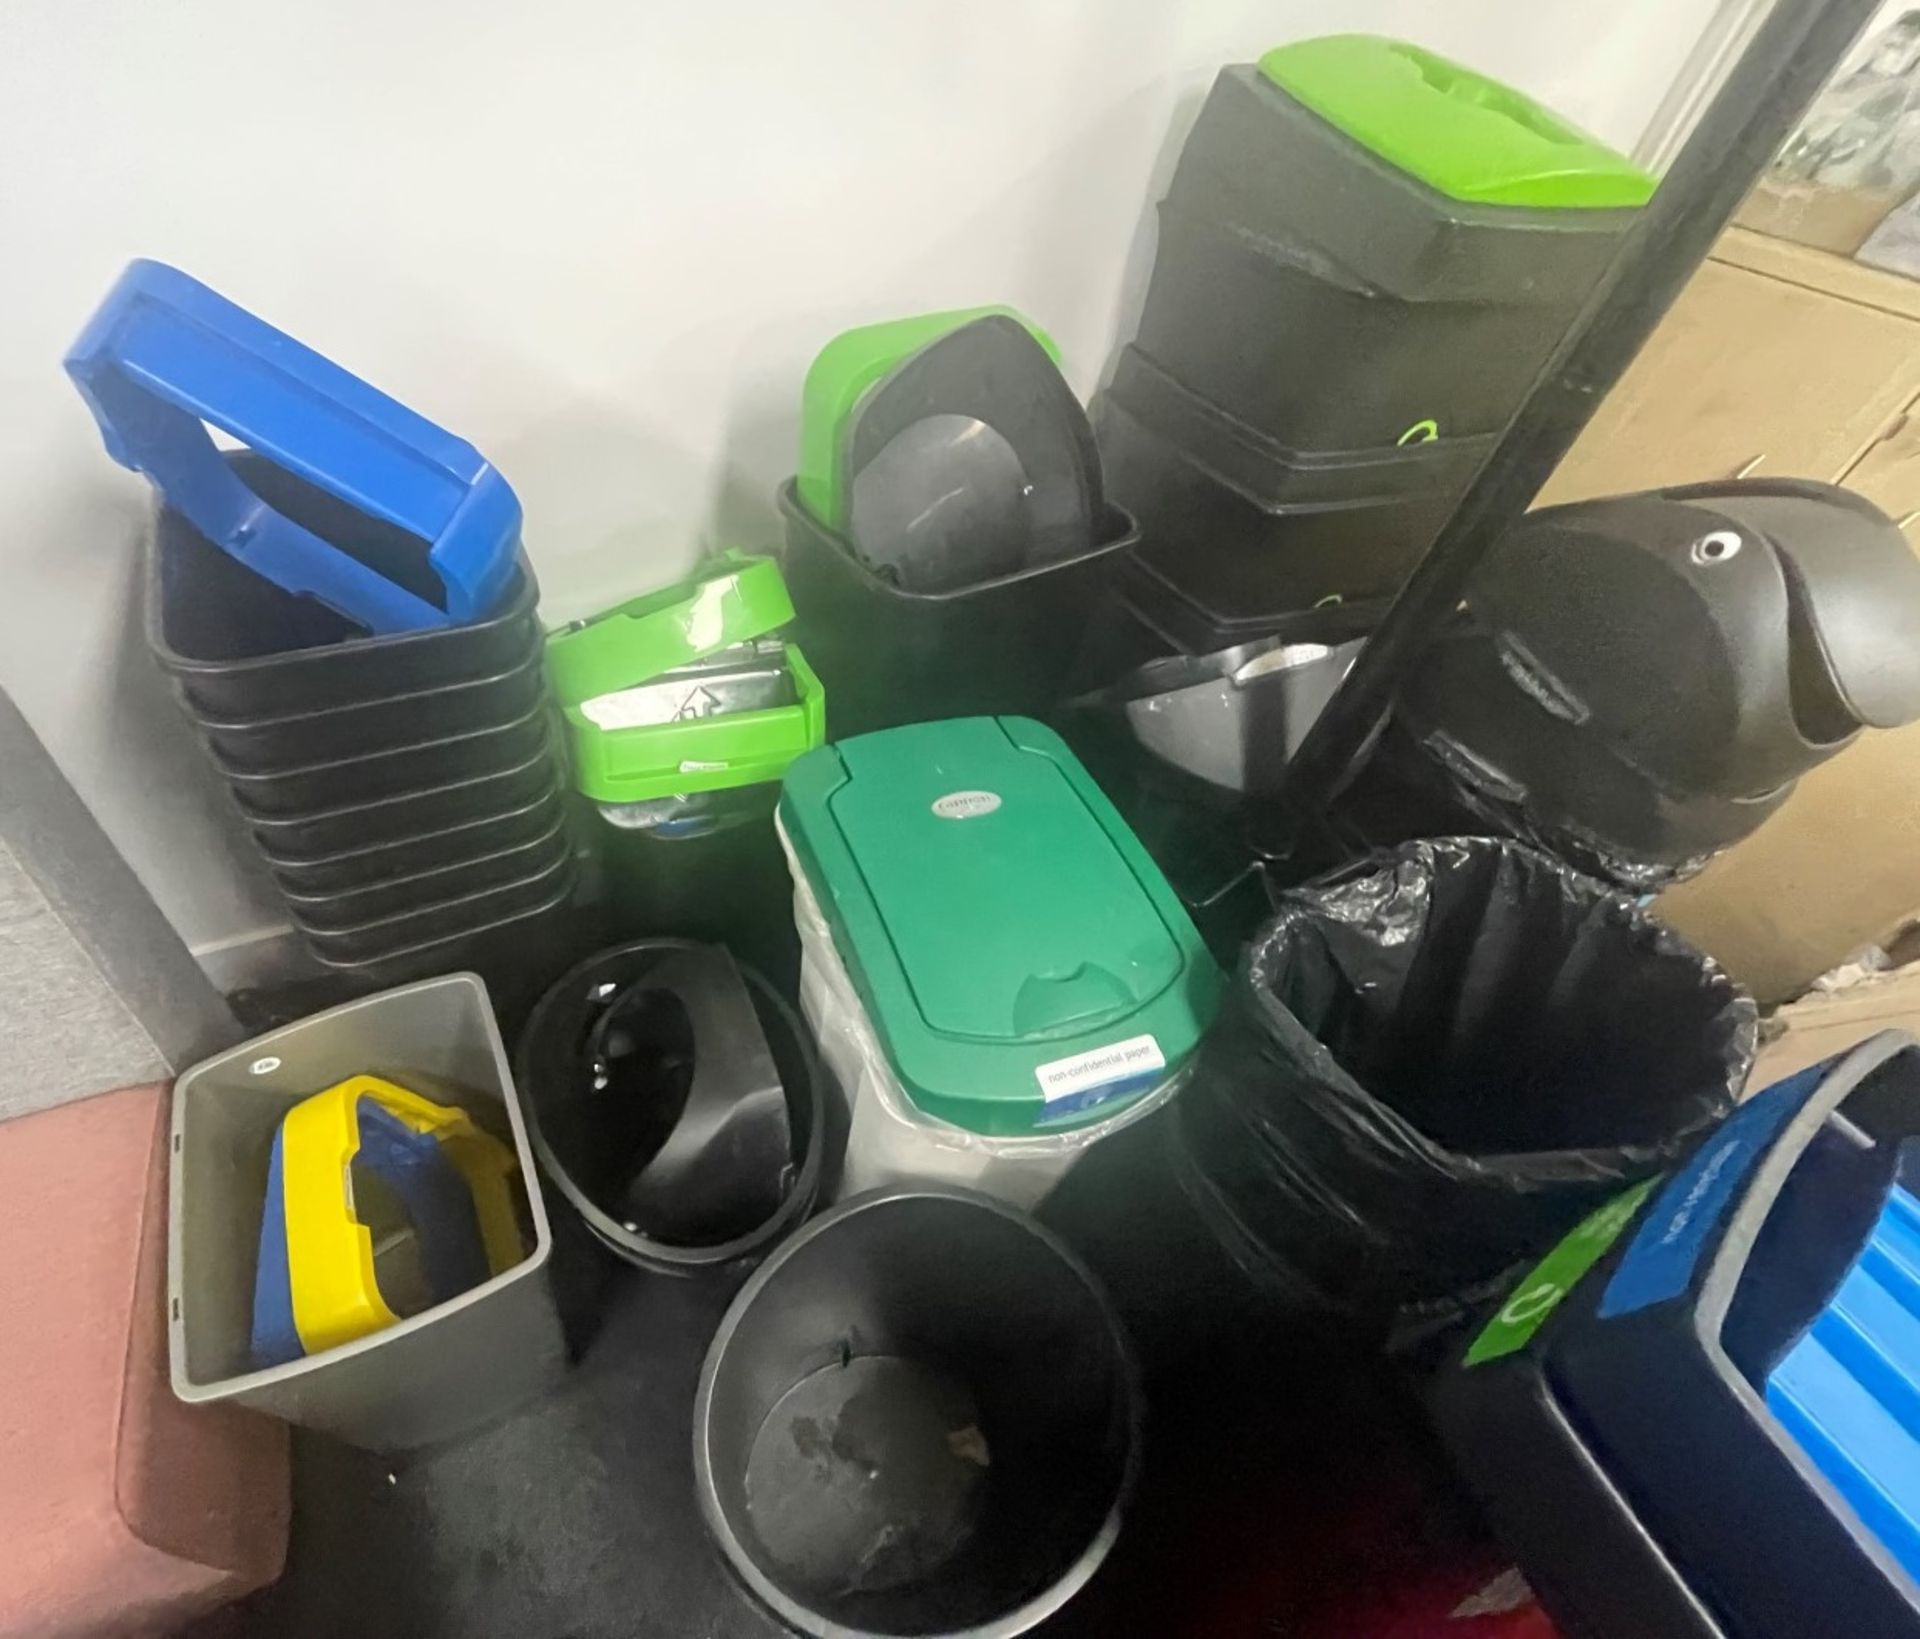 Job Lot of Approximately 73 x Recycling / Bins - To Be Removed From An Executive Office Environment - Image 15 of 15